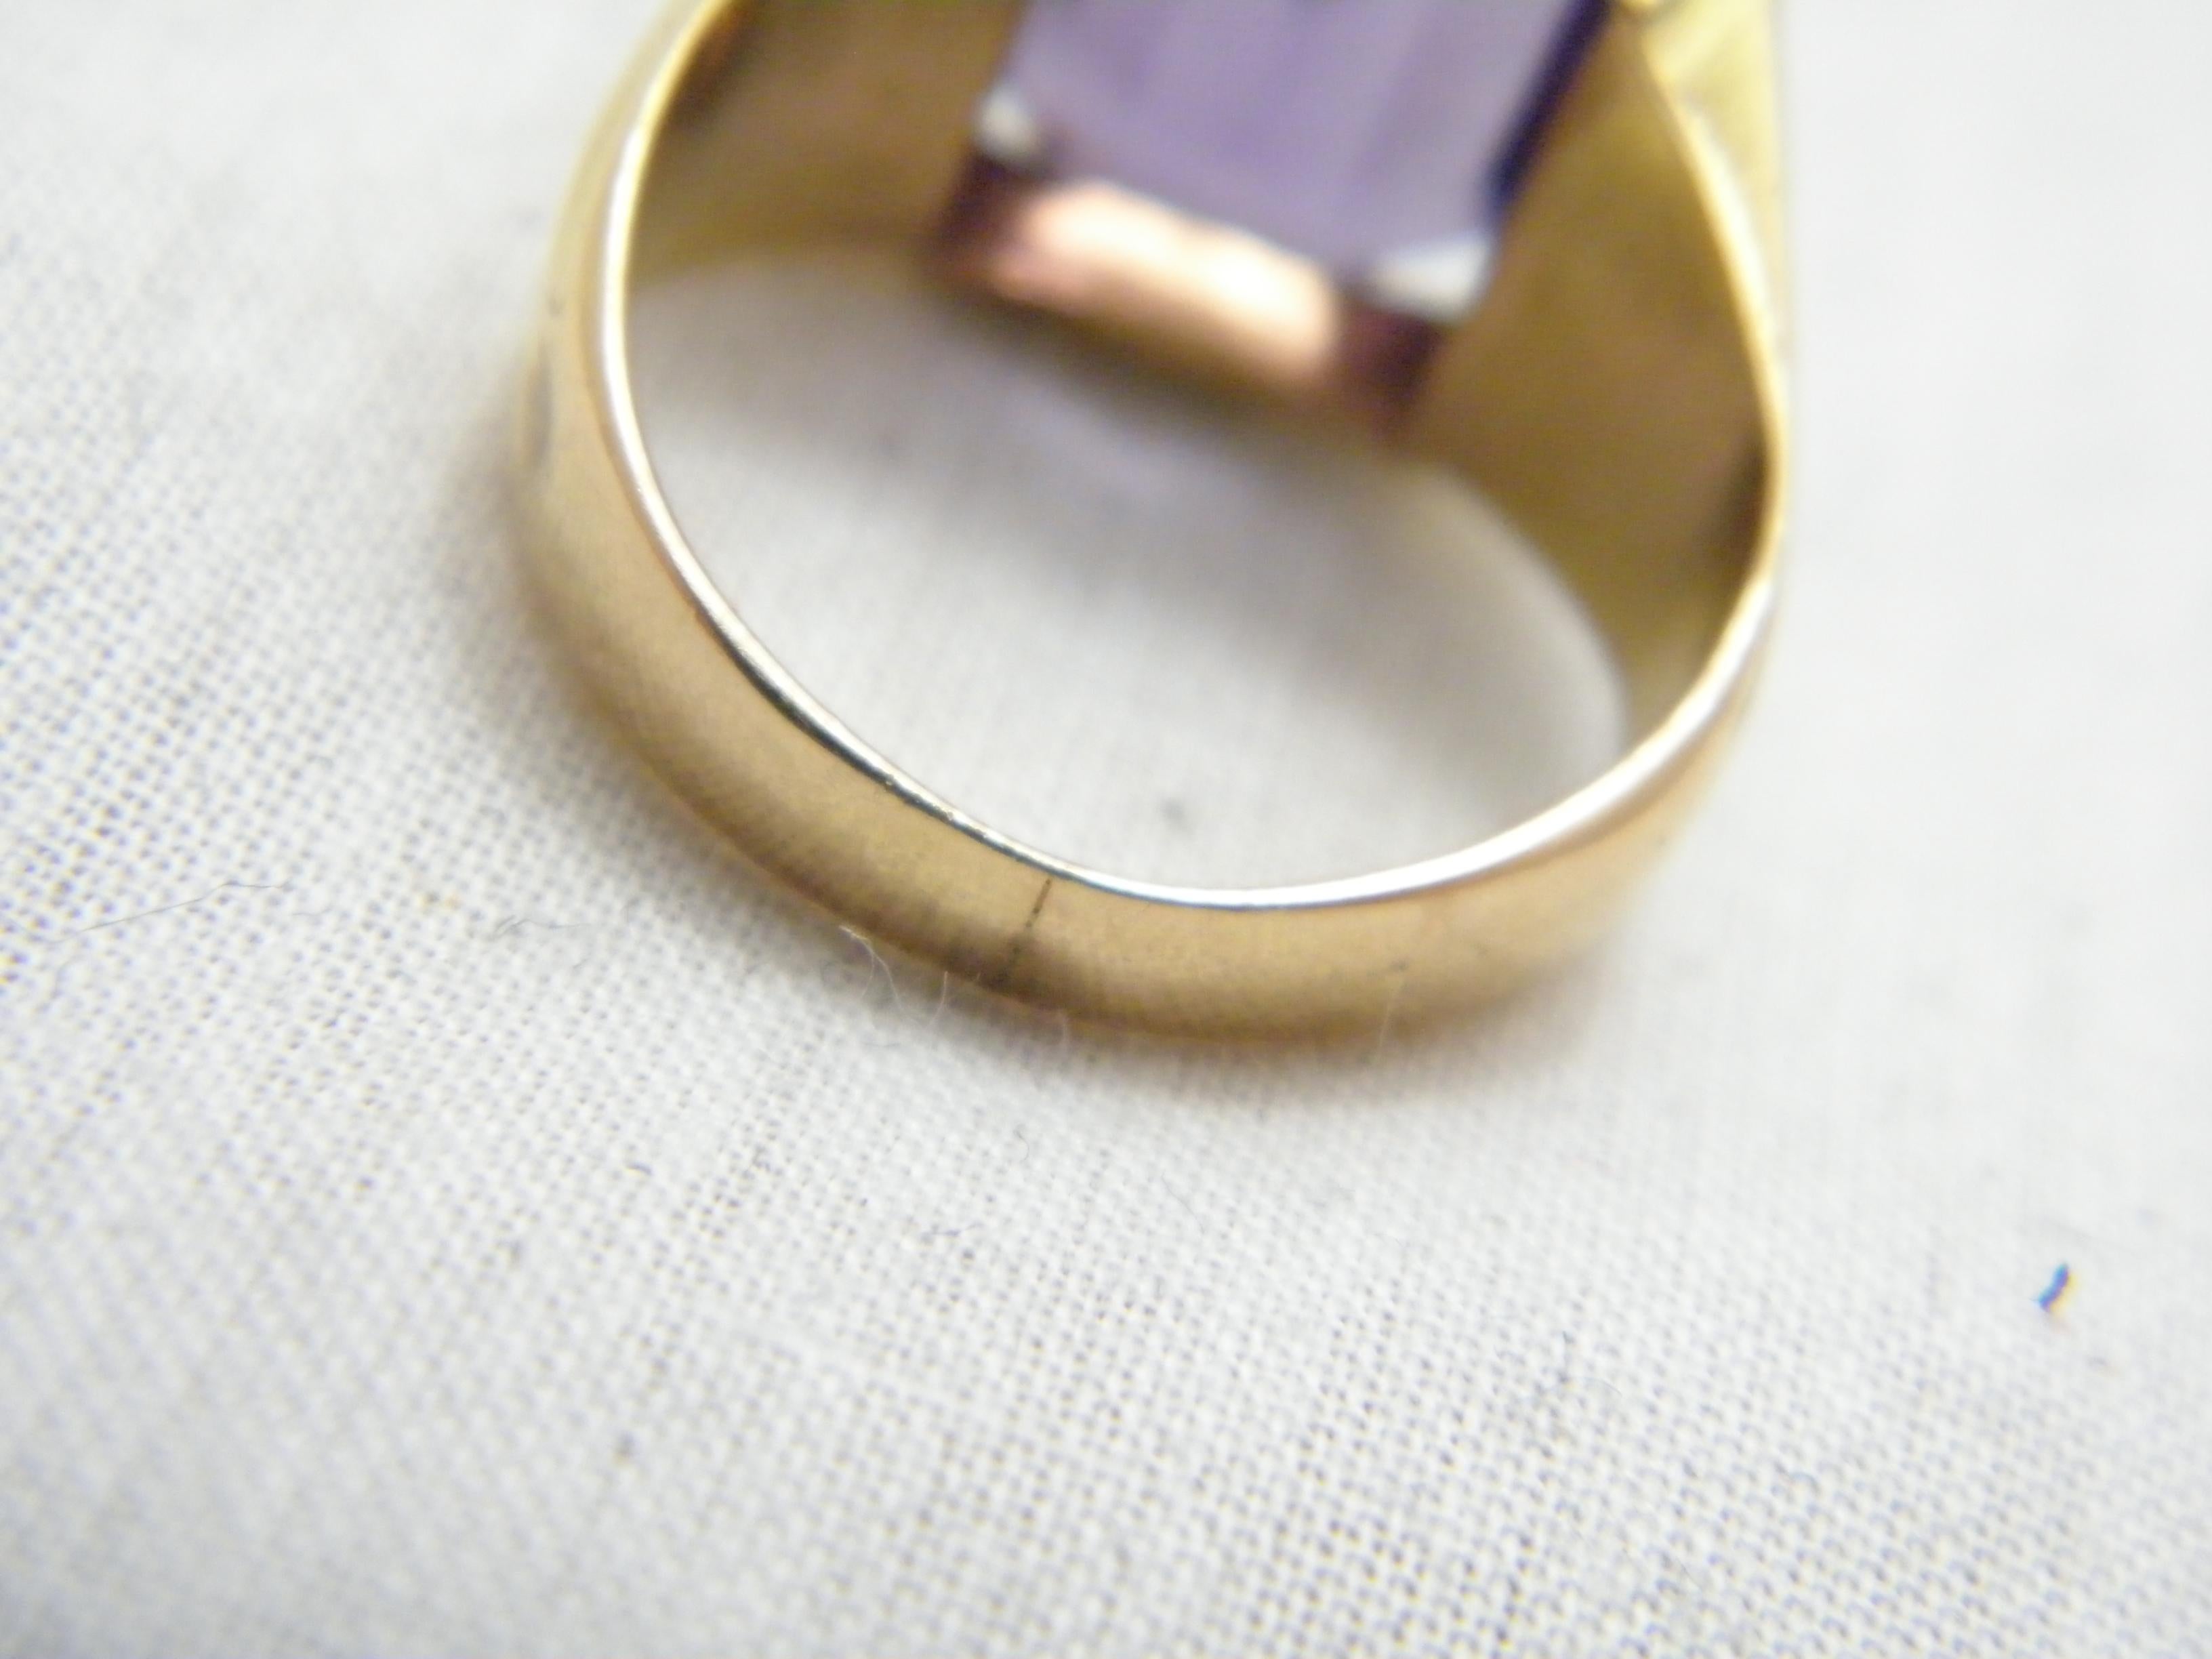 Vintage Alexandrite 18ct Gold Statement Signet Ring Size P 7.75 750 Purity Heavy 1